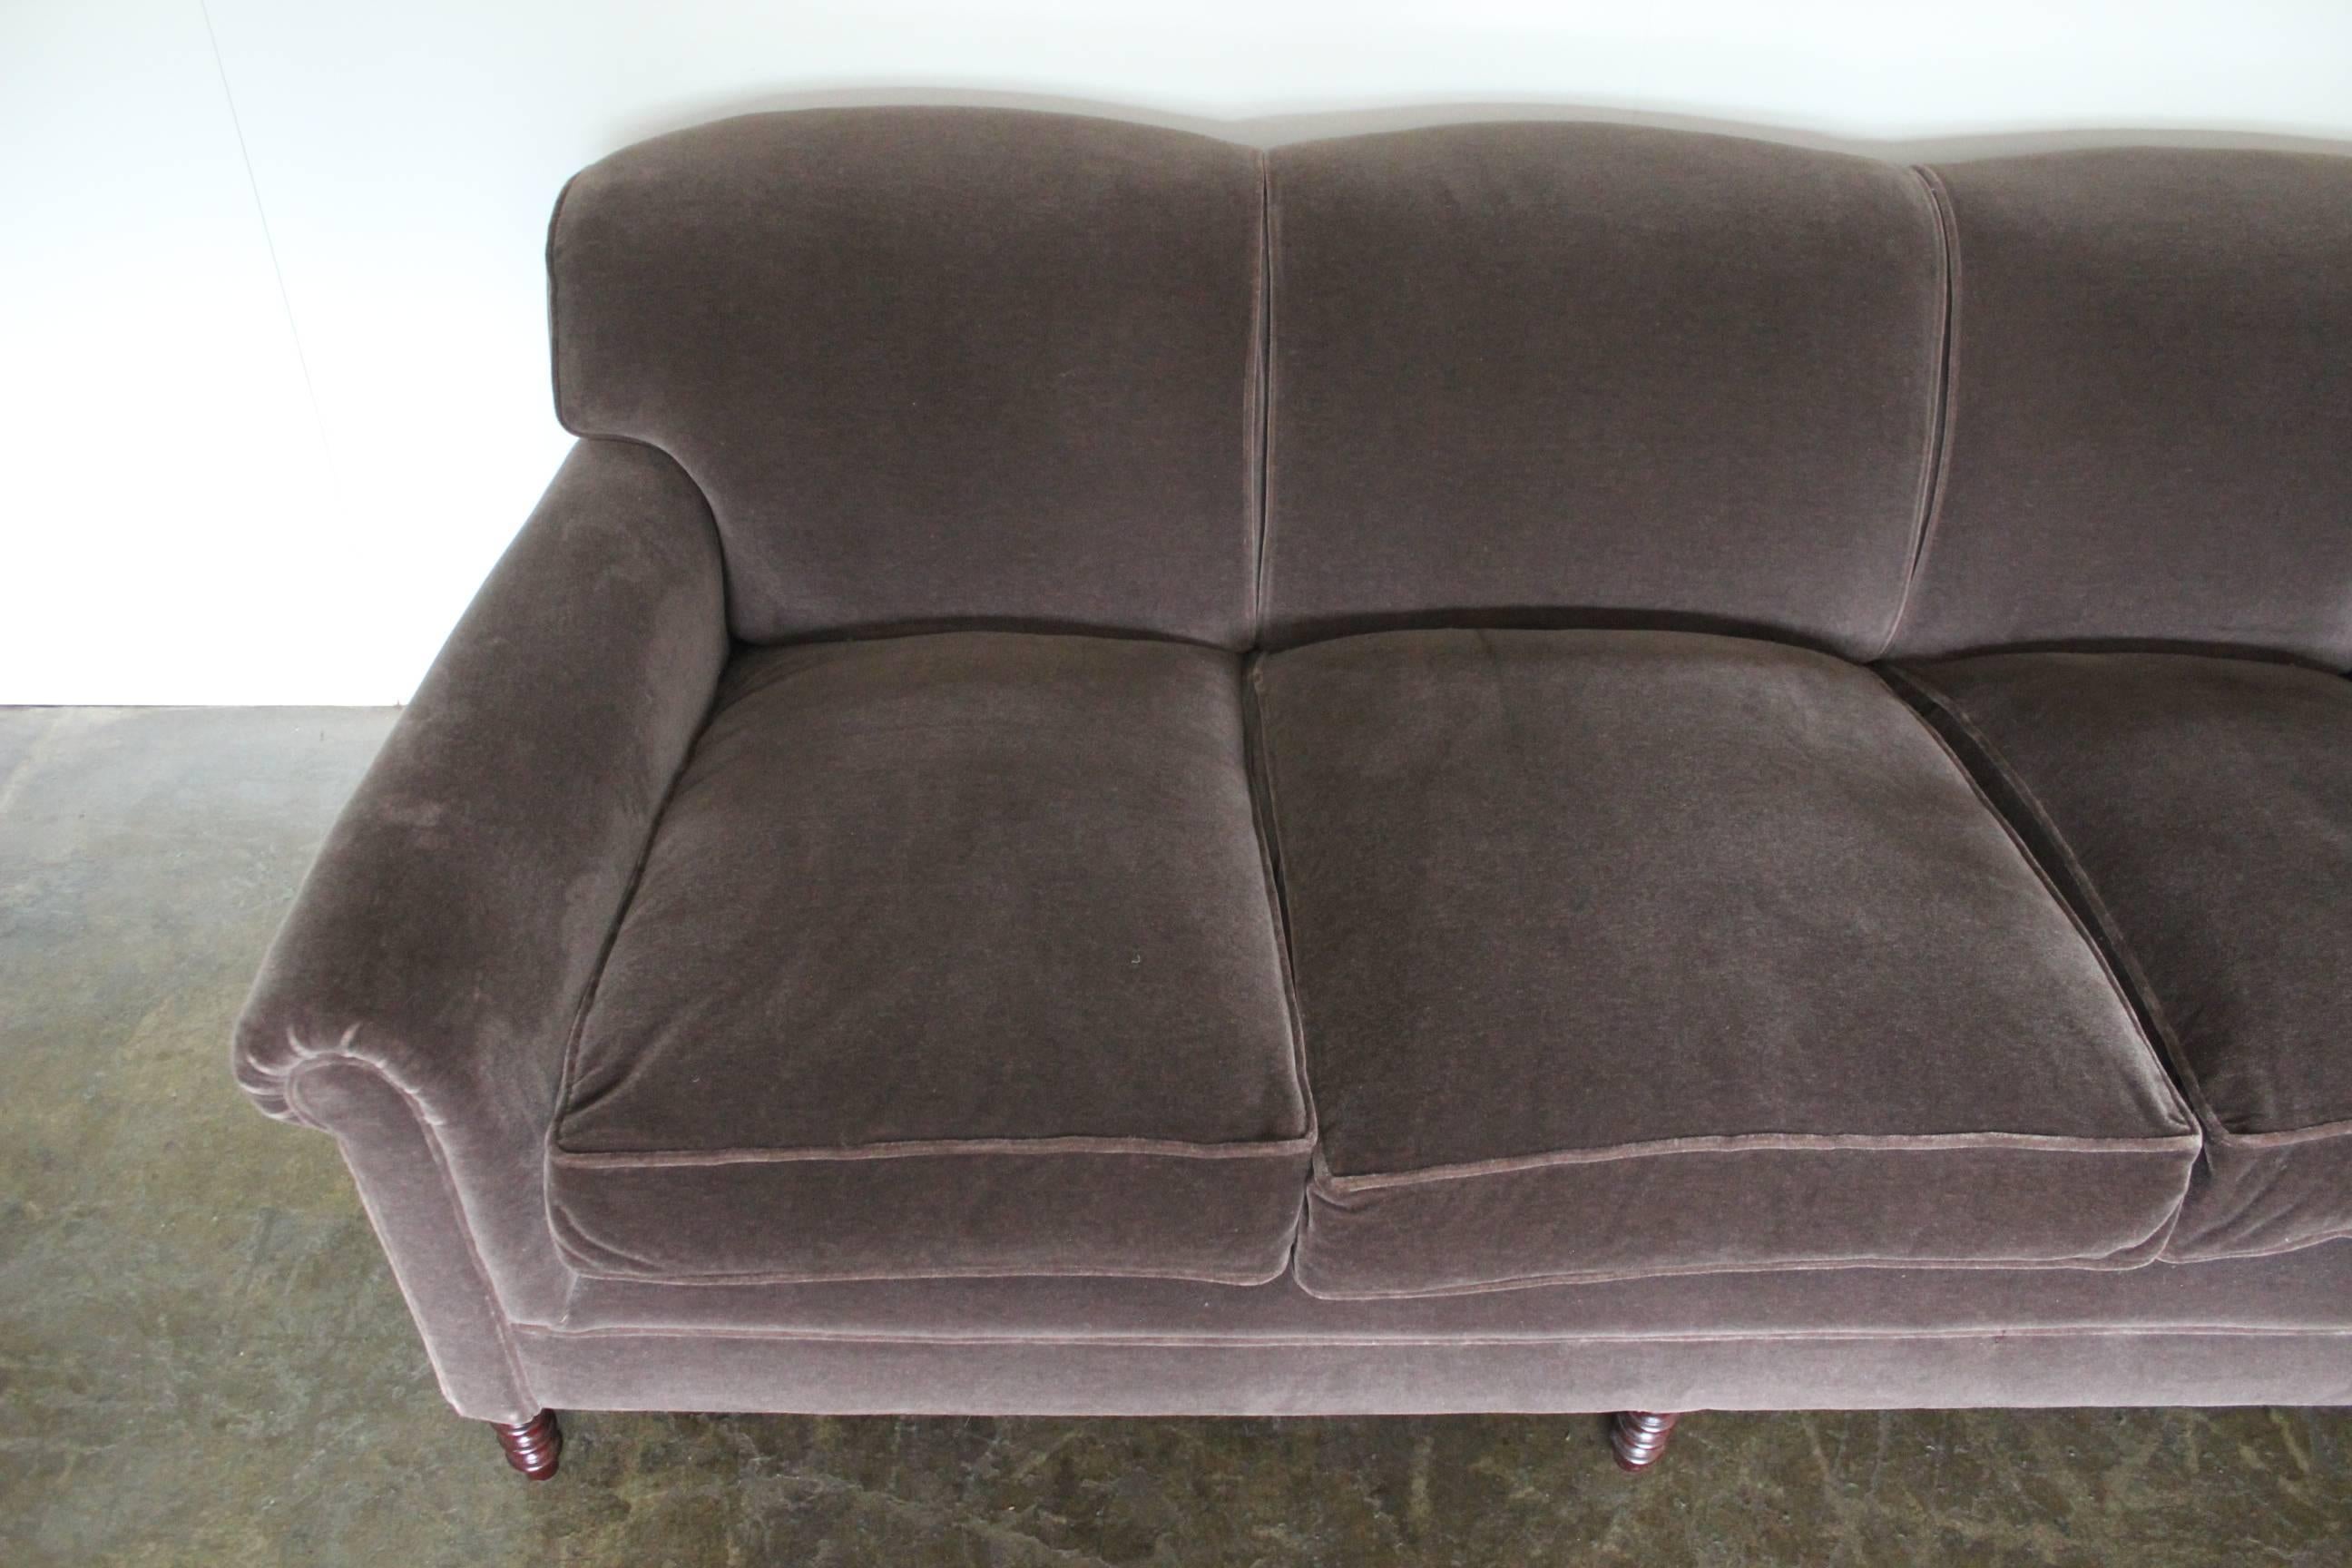 Velvet Pair of George Smith Signature “Scroll-Arm” Three-Seat Sofas in “Mink” Mohair